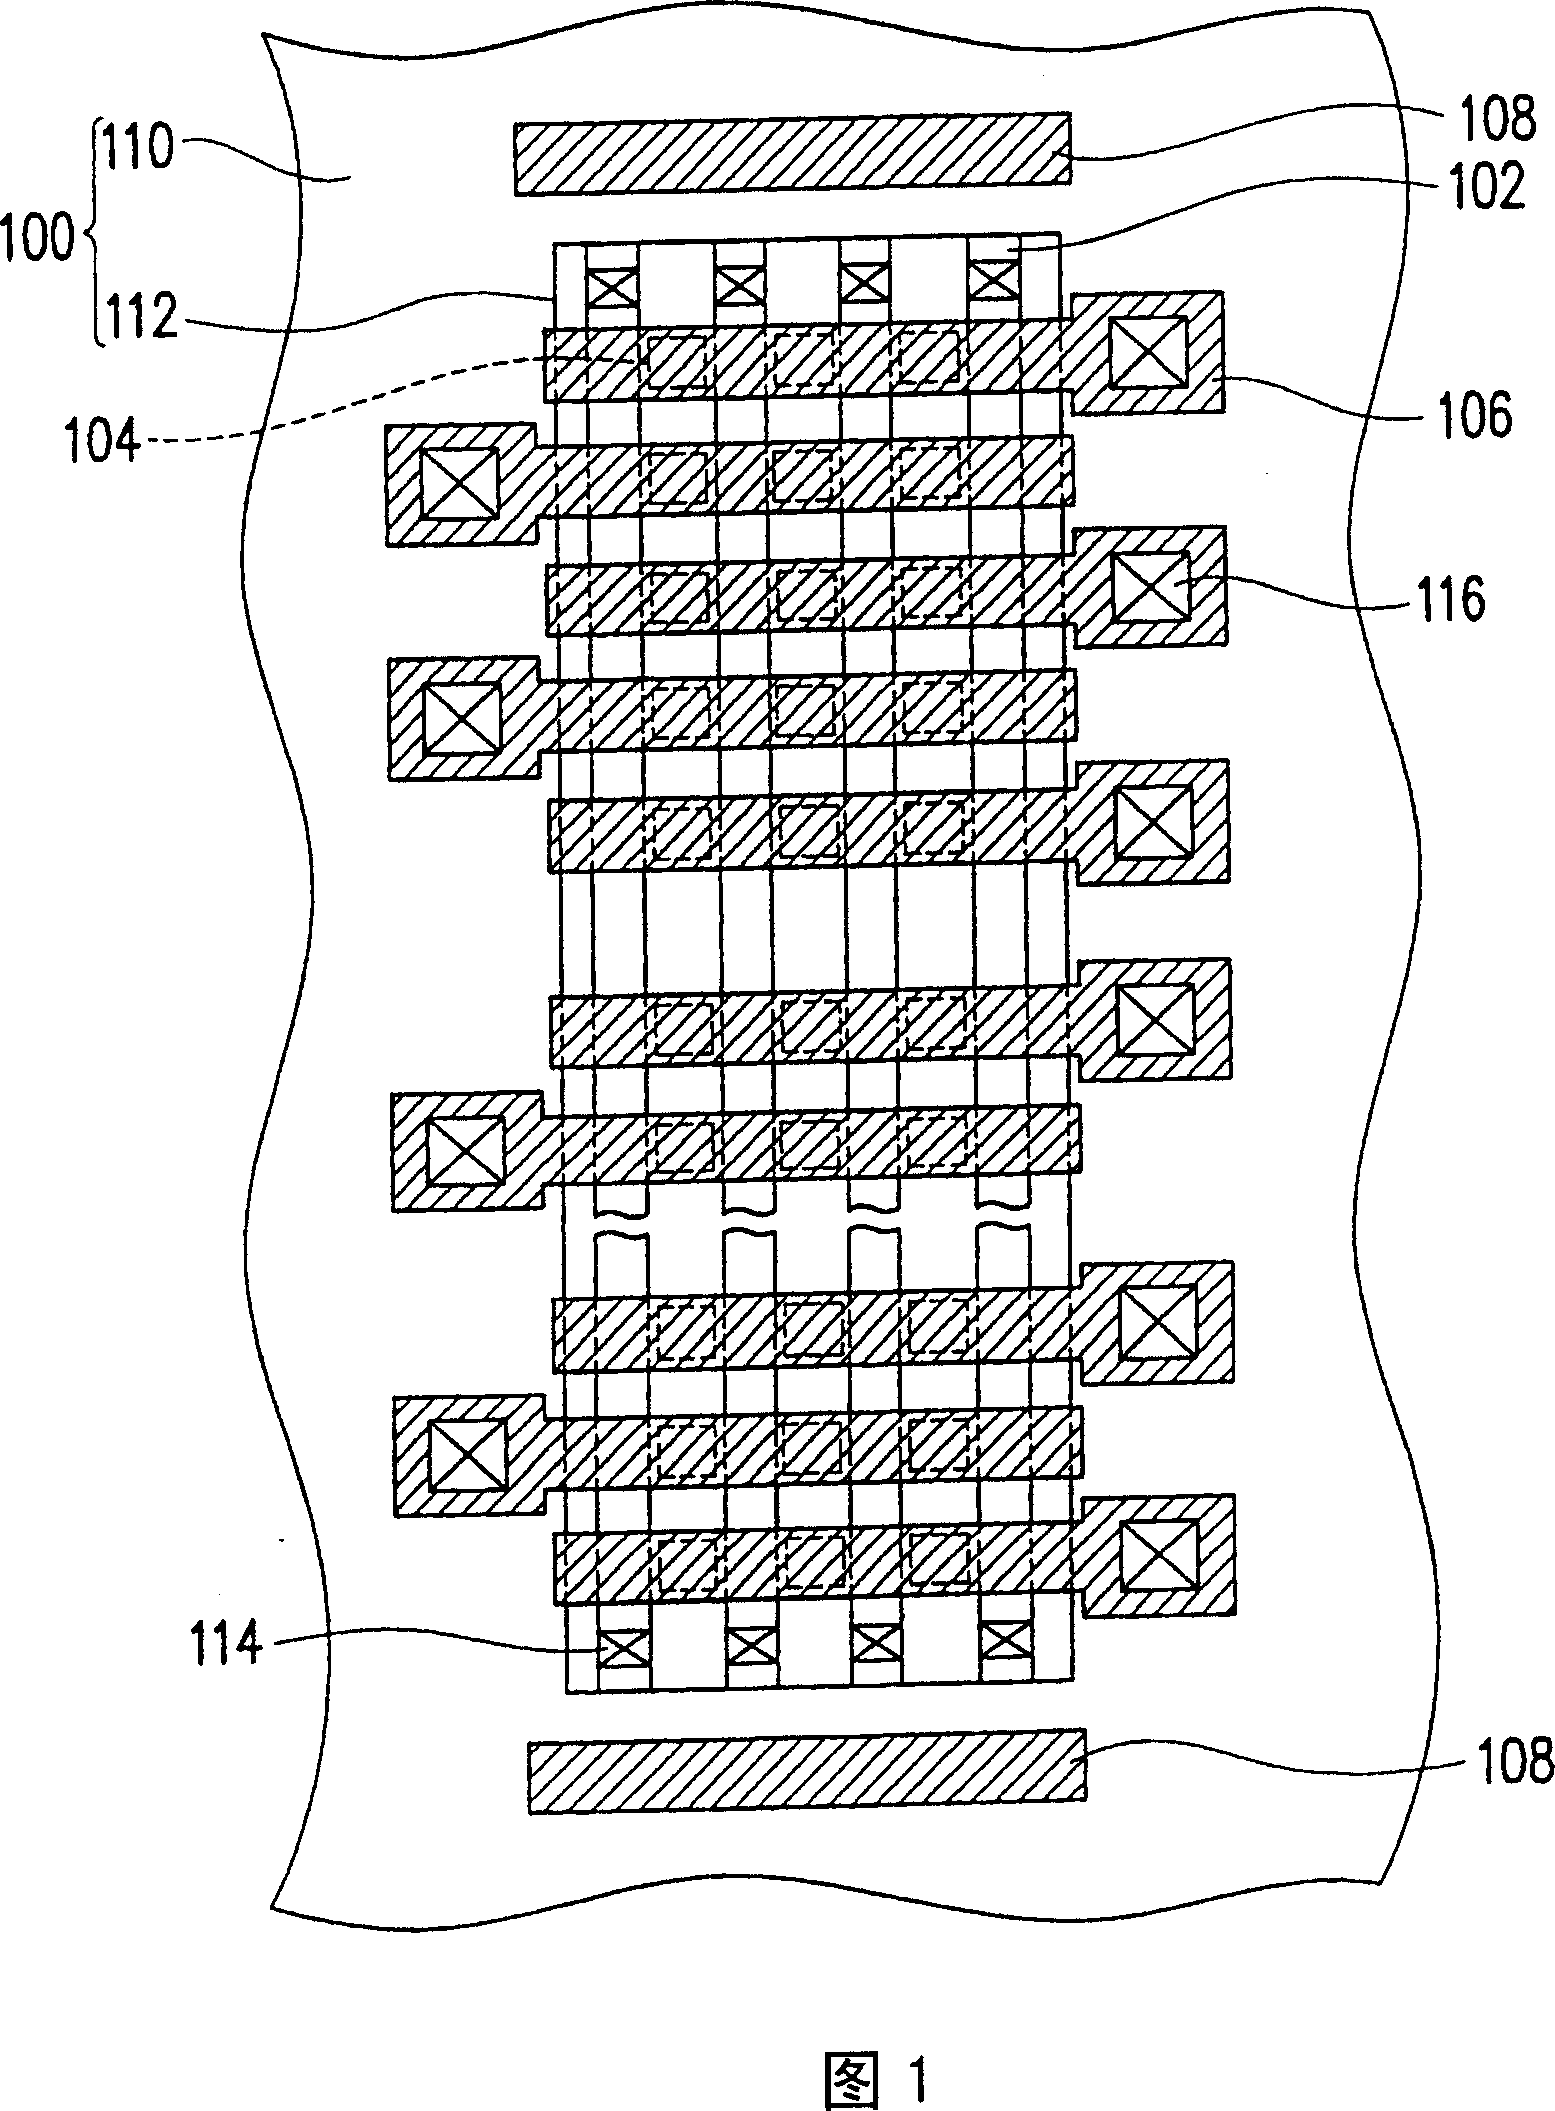 Layout structure of non-volatile memory